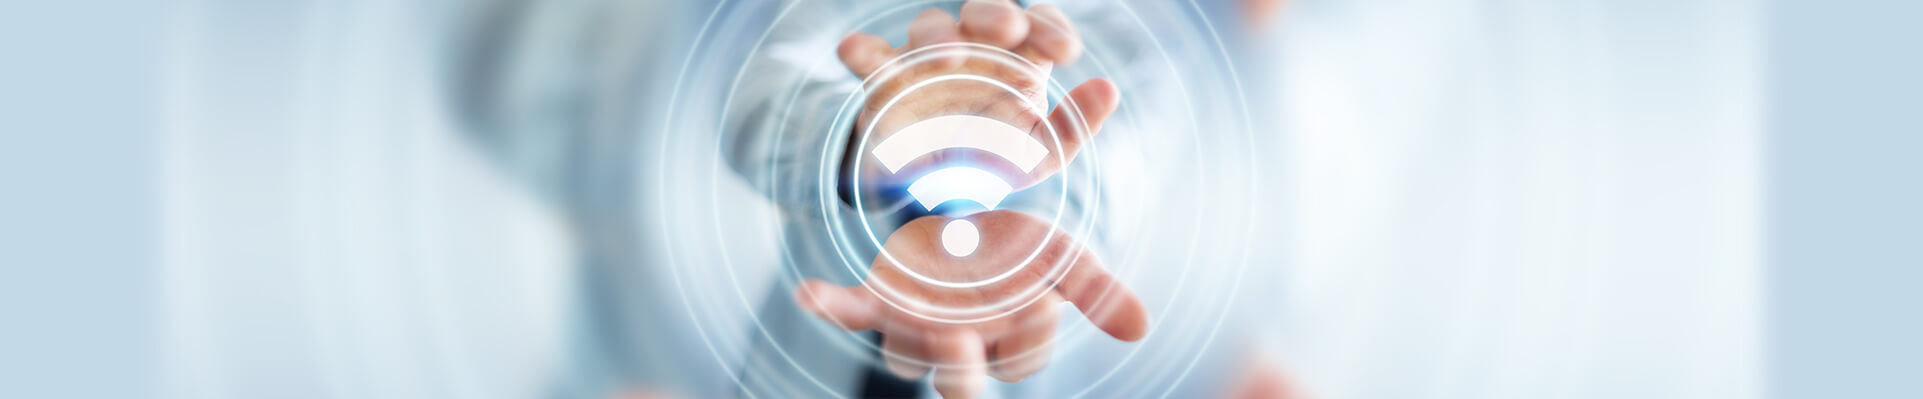 Simple Ways to Boost your Wi-Fi signal and Improve your Internet Speed